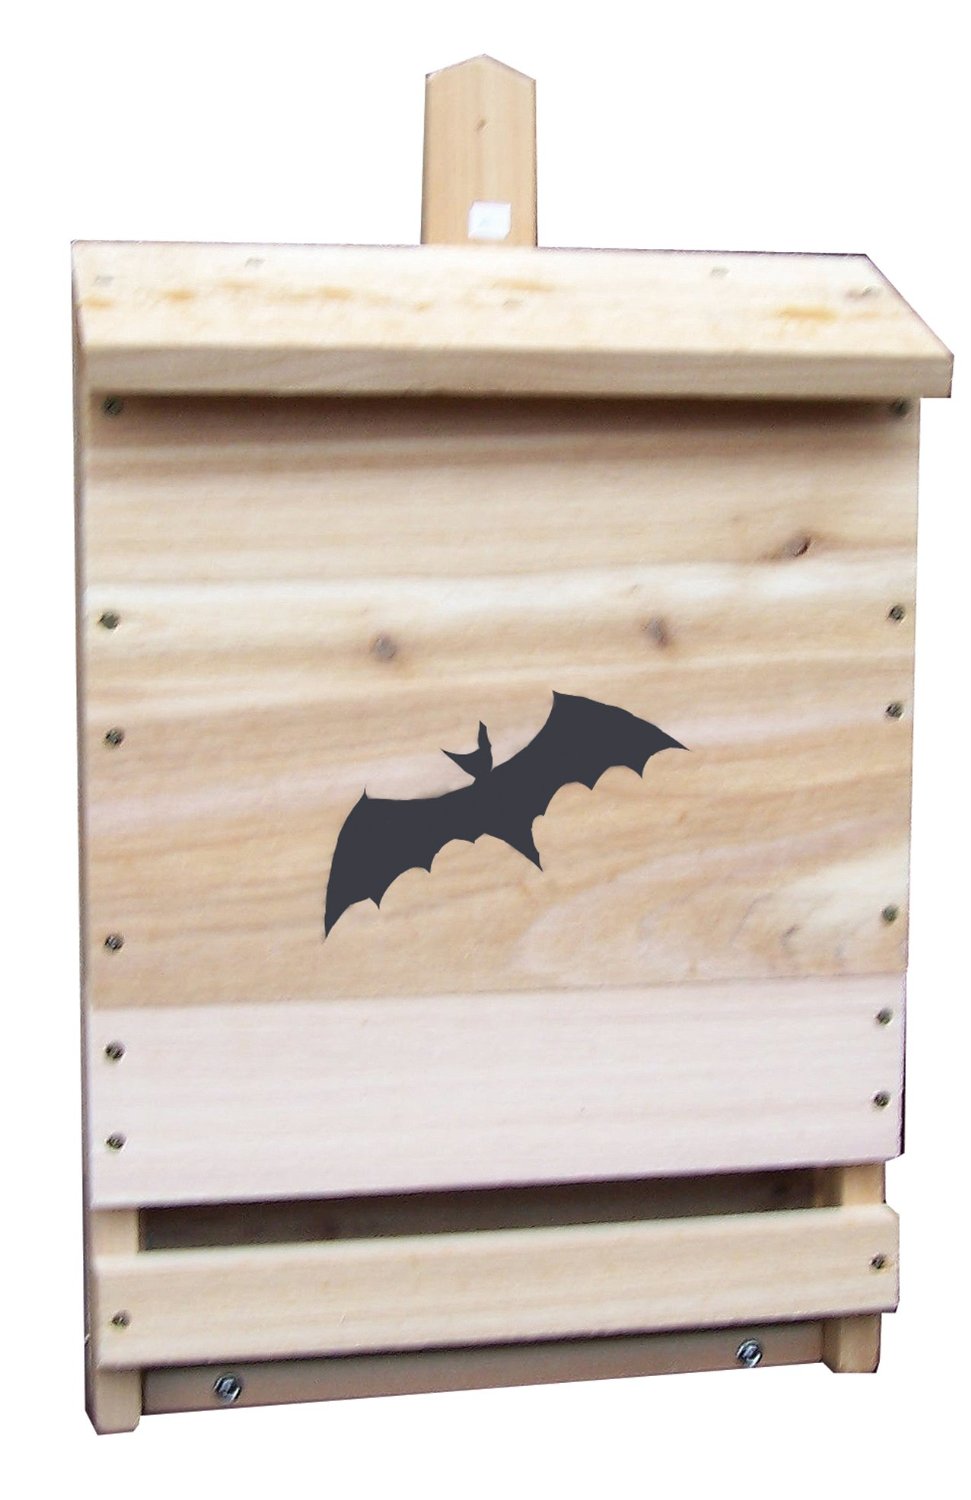 Stovall Single Cell Bat House